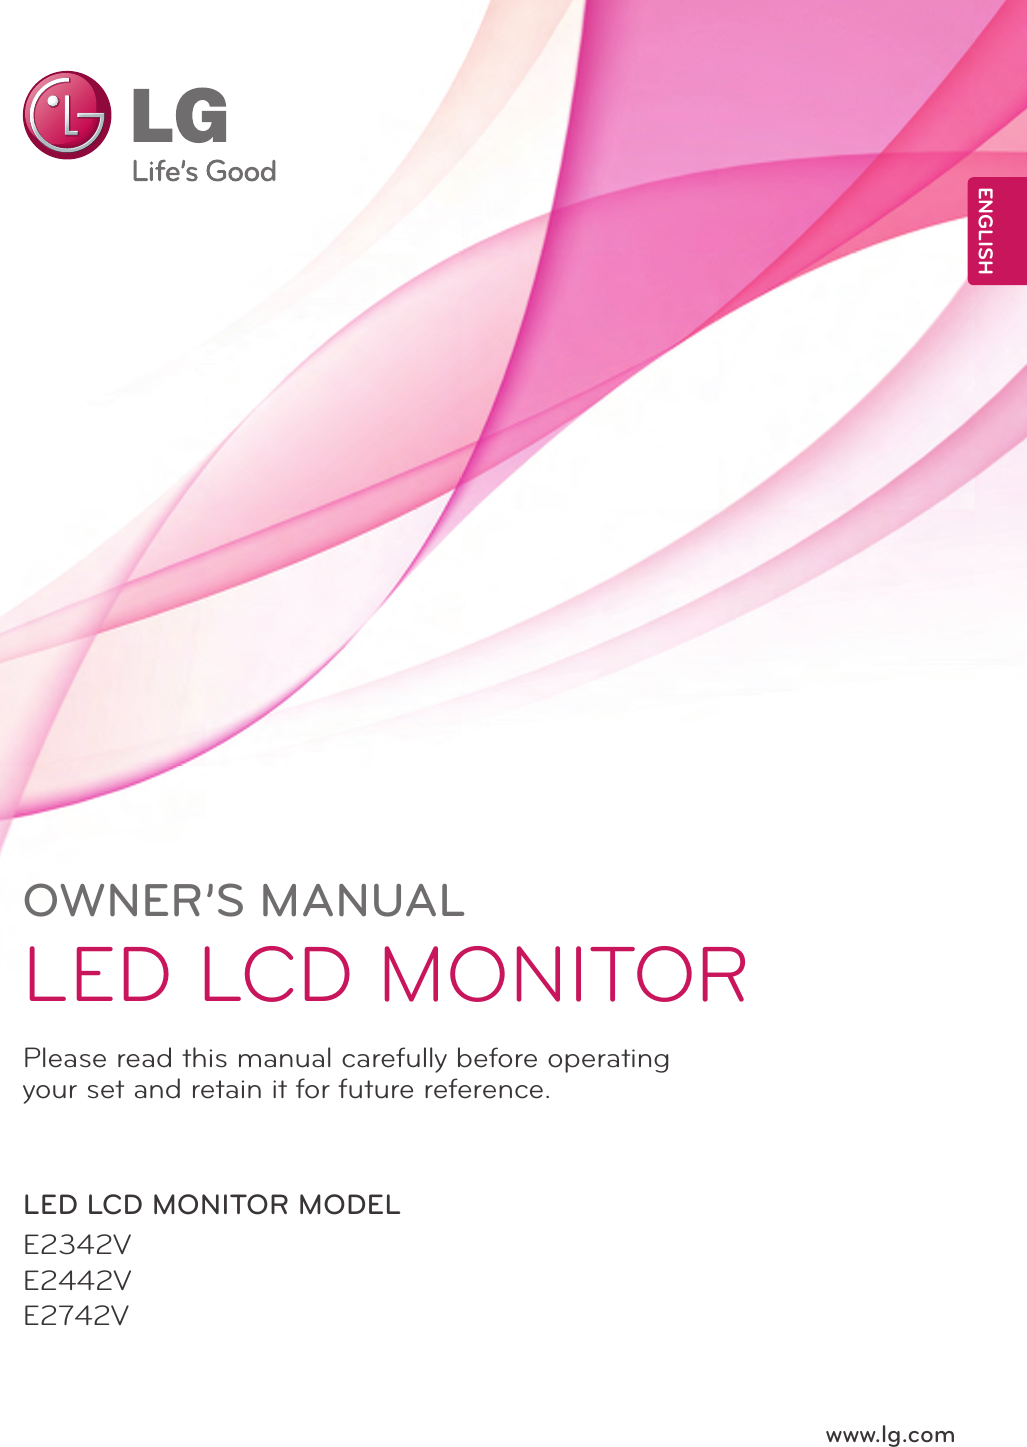 www.lg.comOWNER’S MANUALLED LCD MONITORE2342VE2442VE2742VPlease read this manual carefully before operating your set and retain it for future reference.LED LCD MONITOR MODELENGLISH